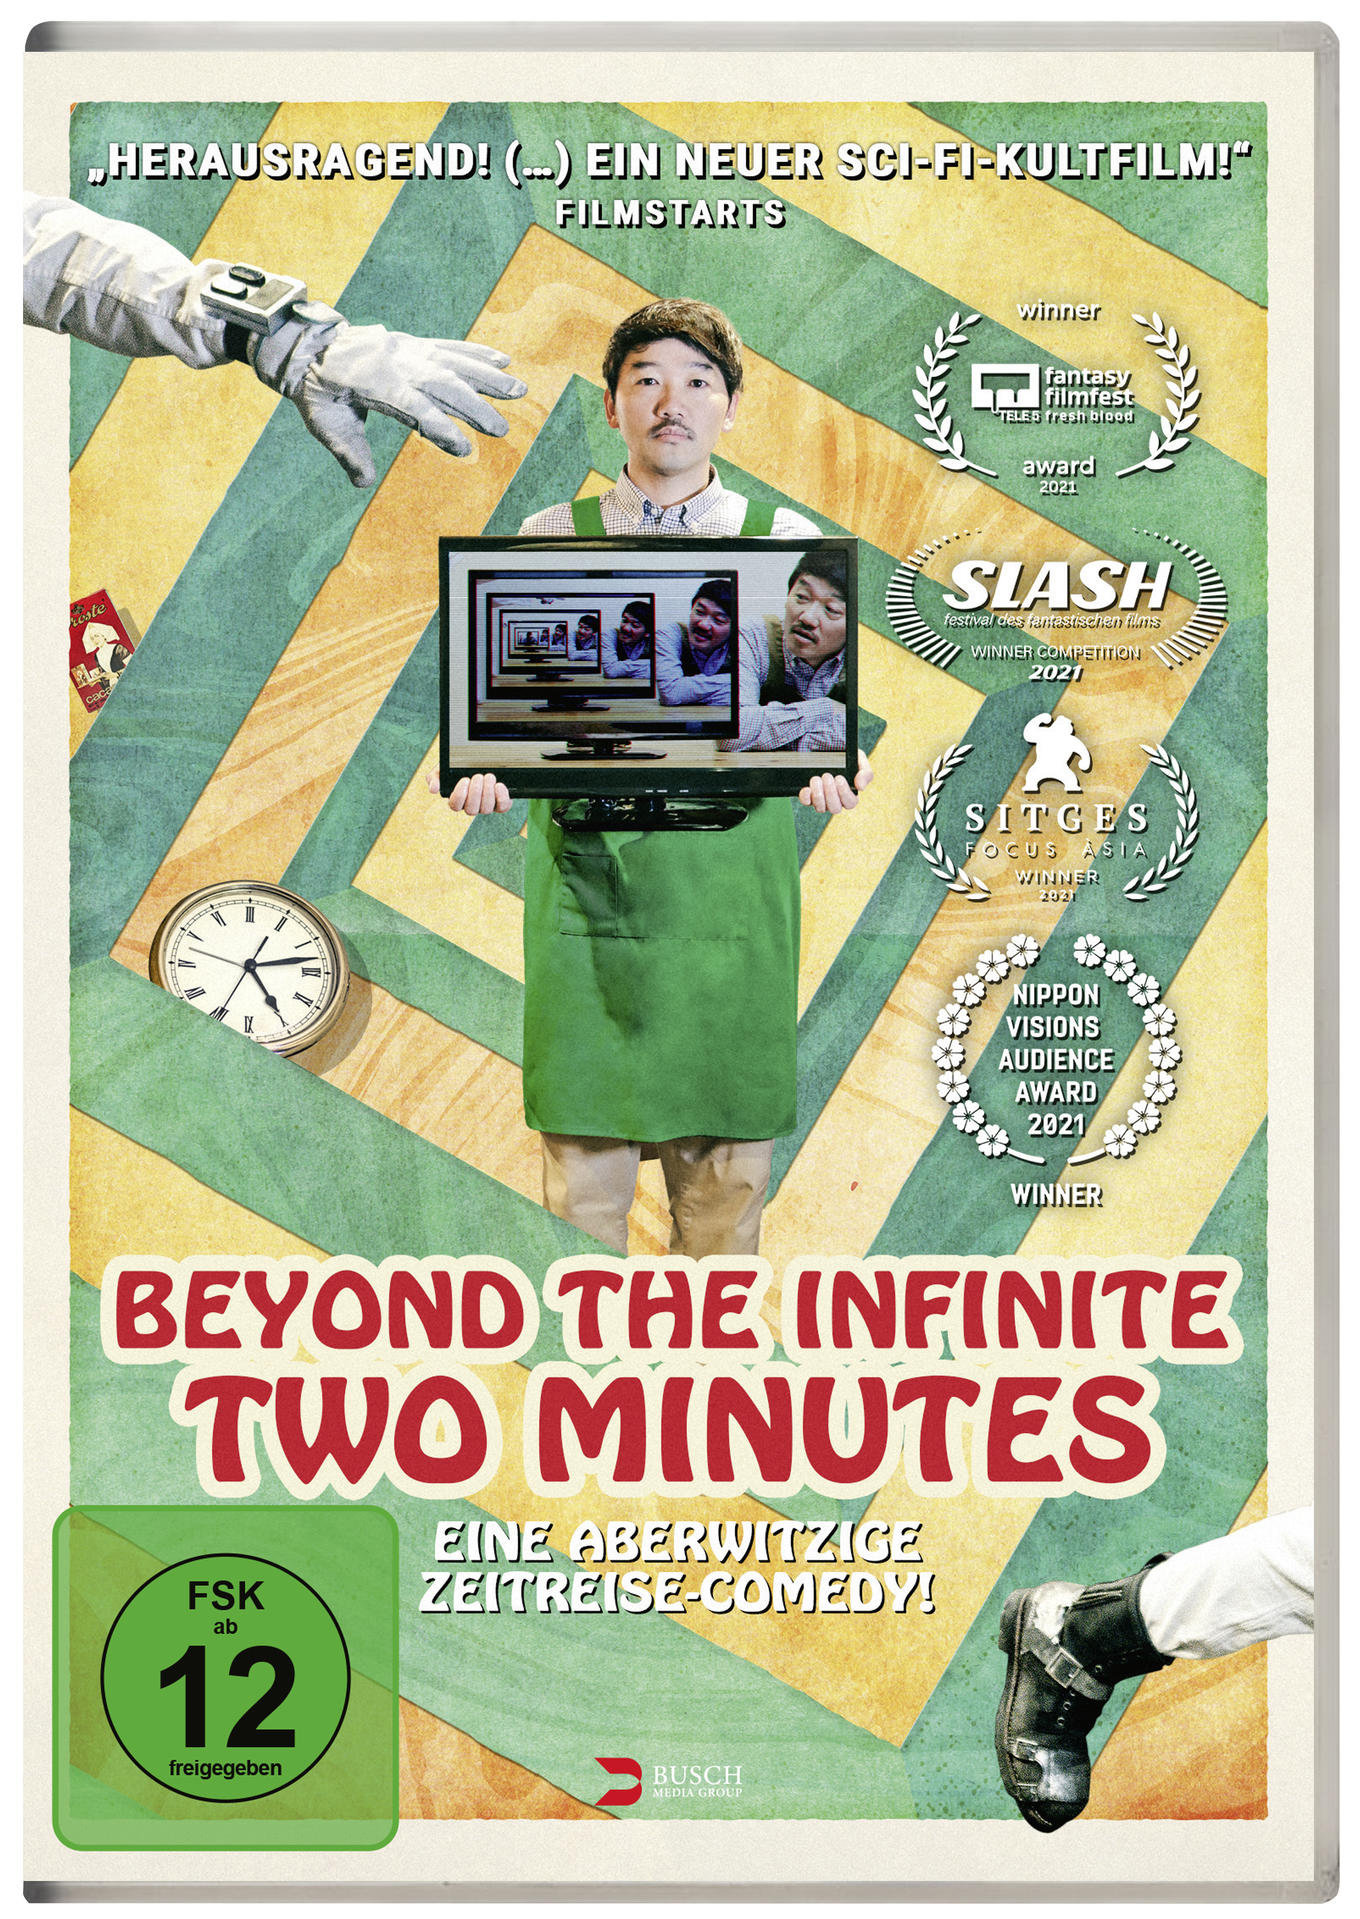 Minutes the DVD Beyond Two Infinite